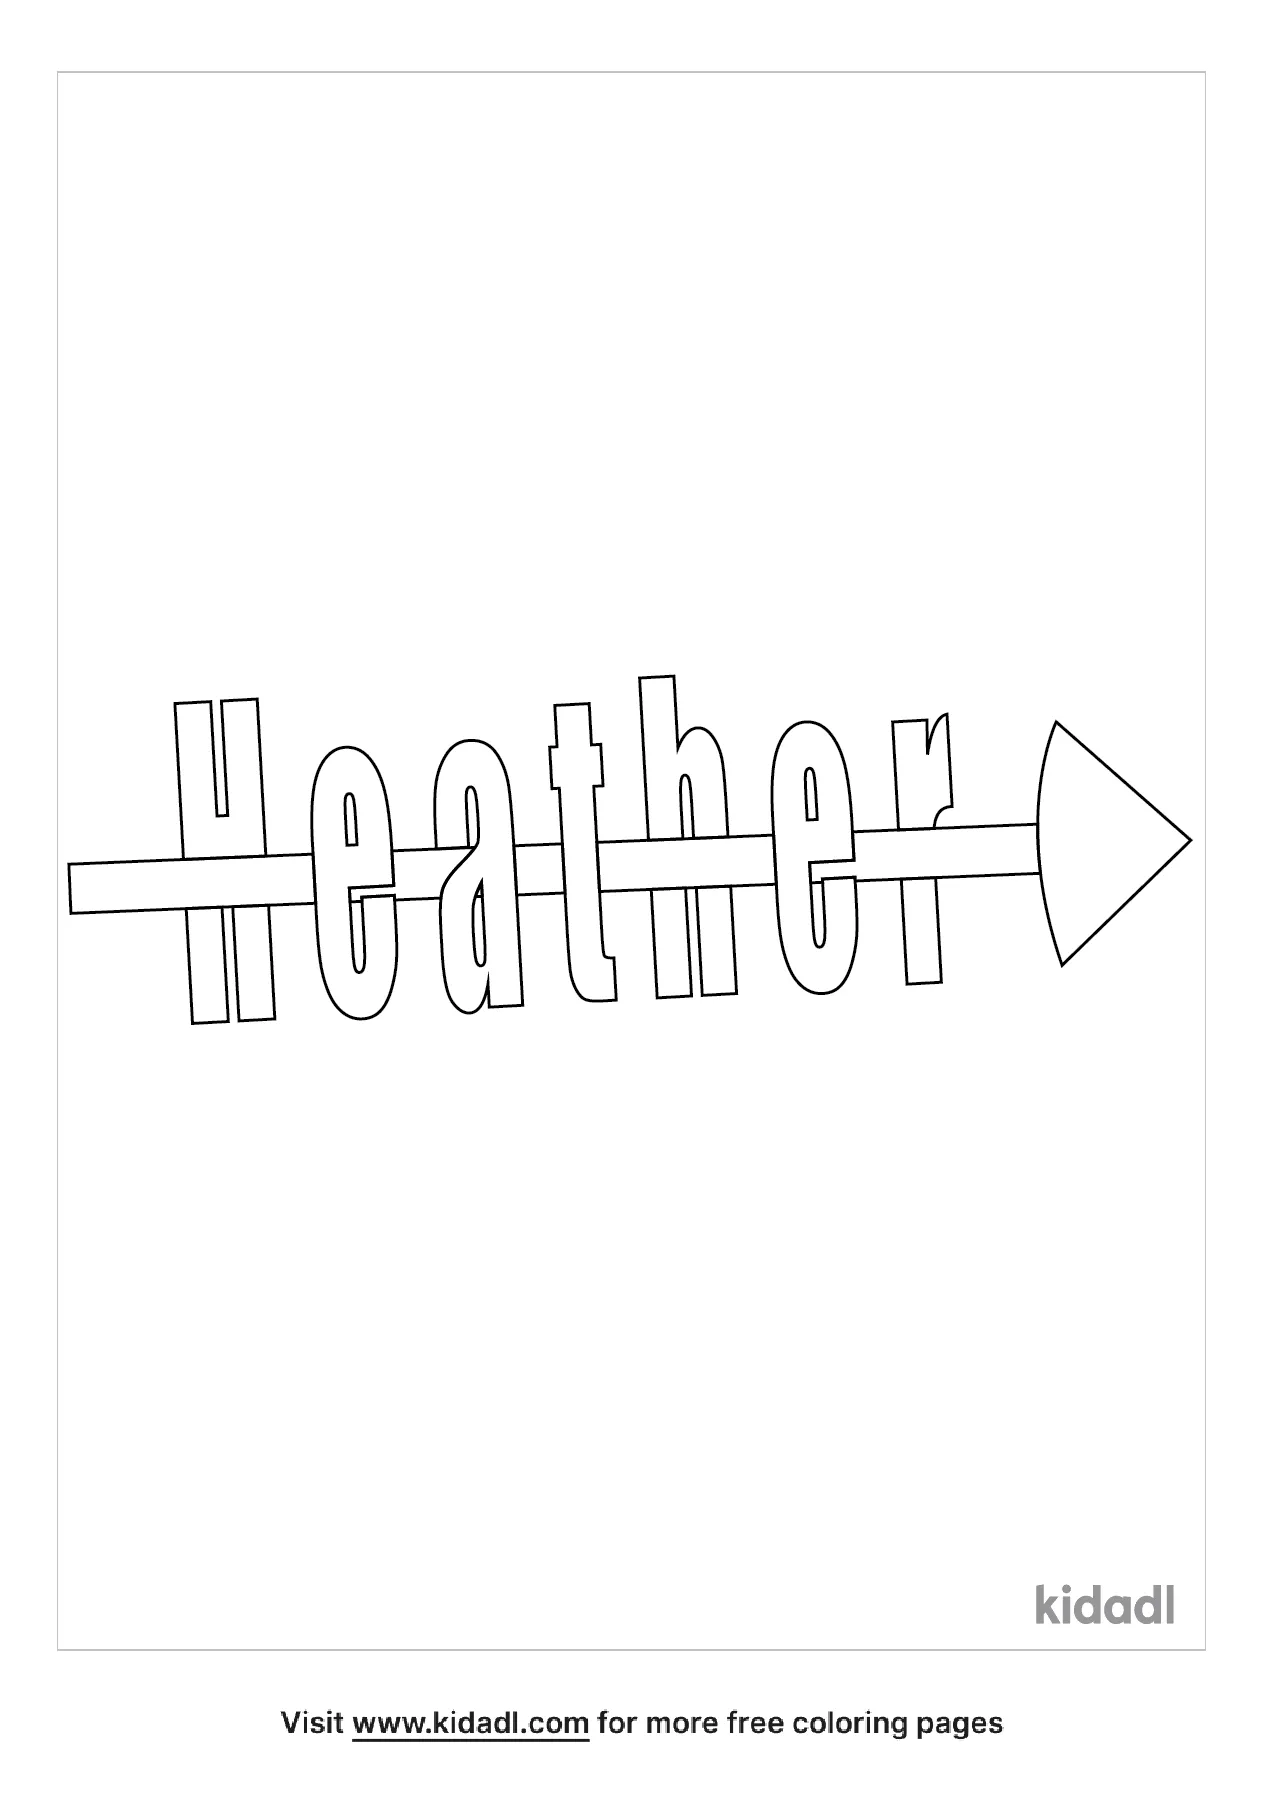 Name Heather Coloring Page